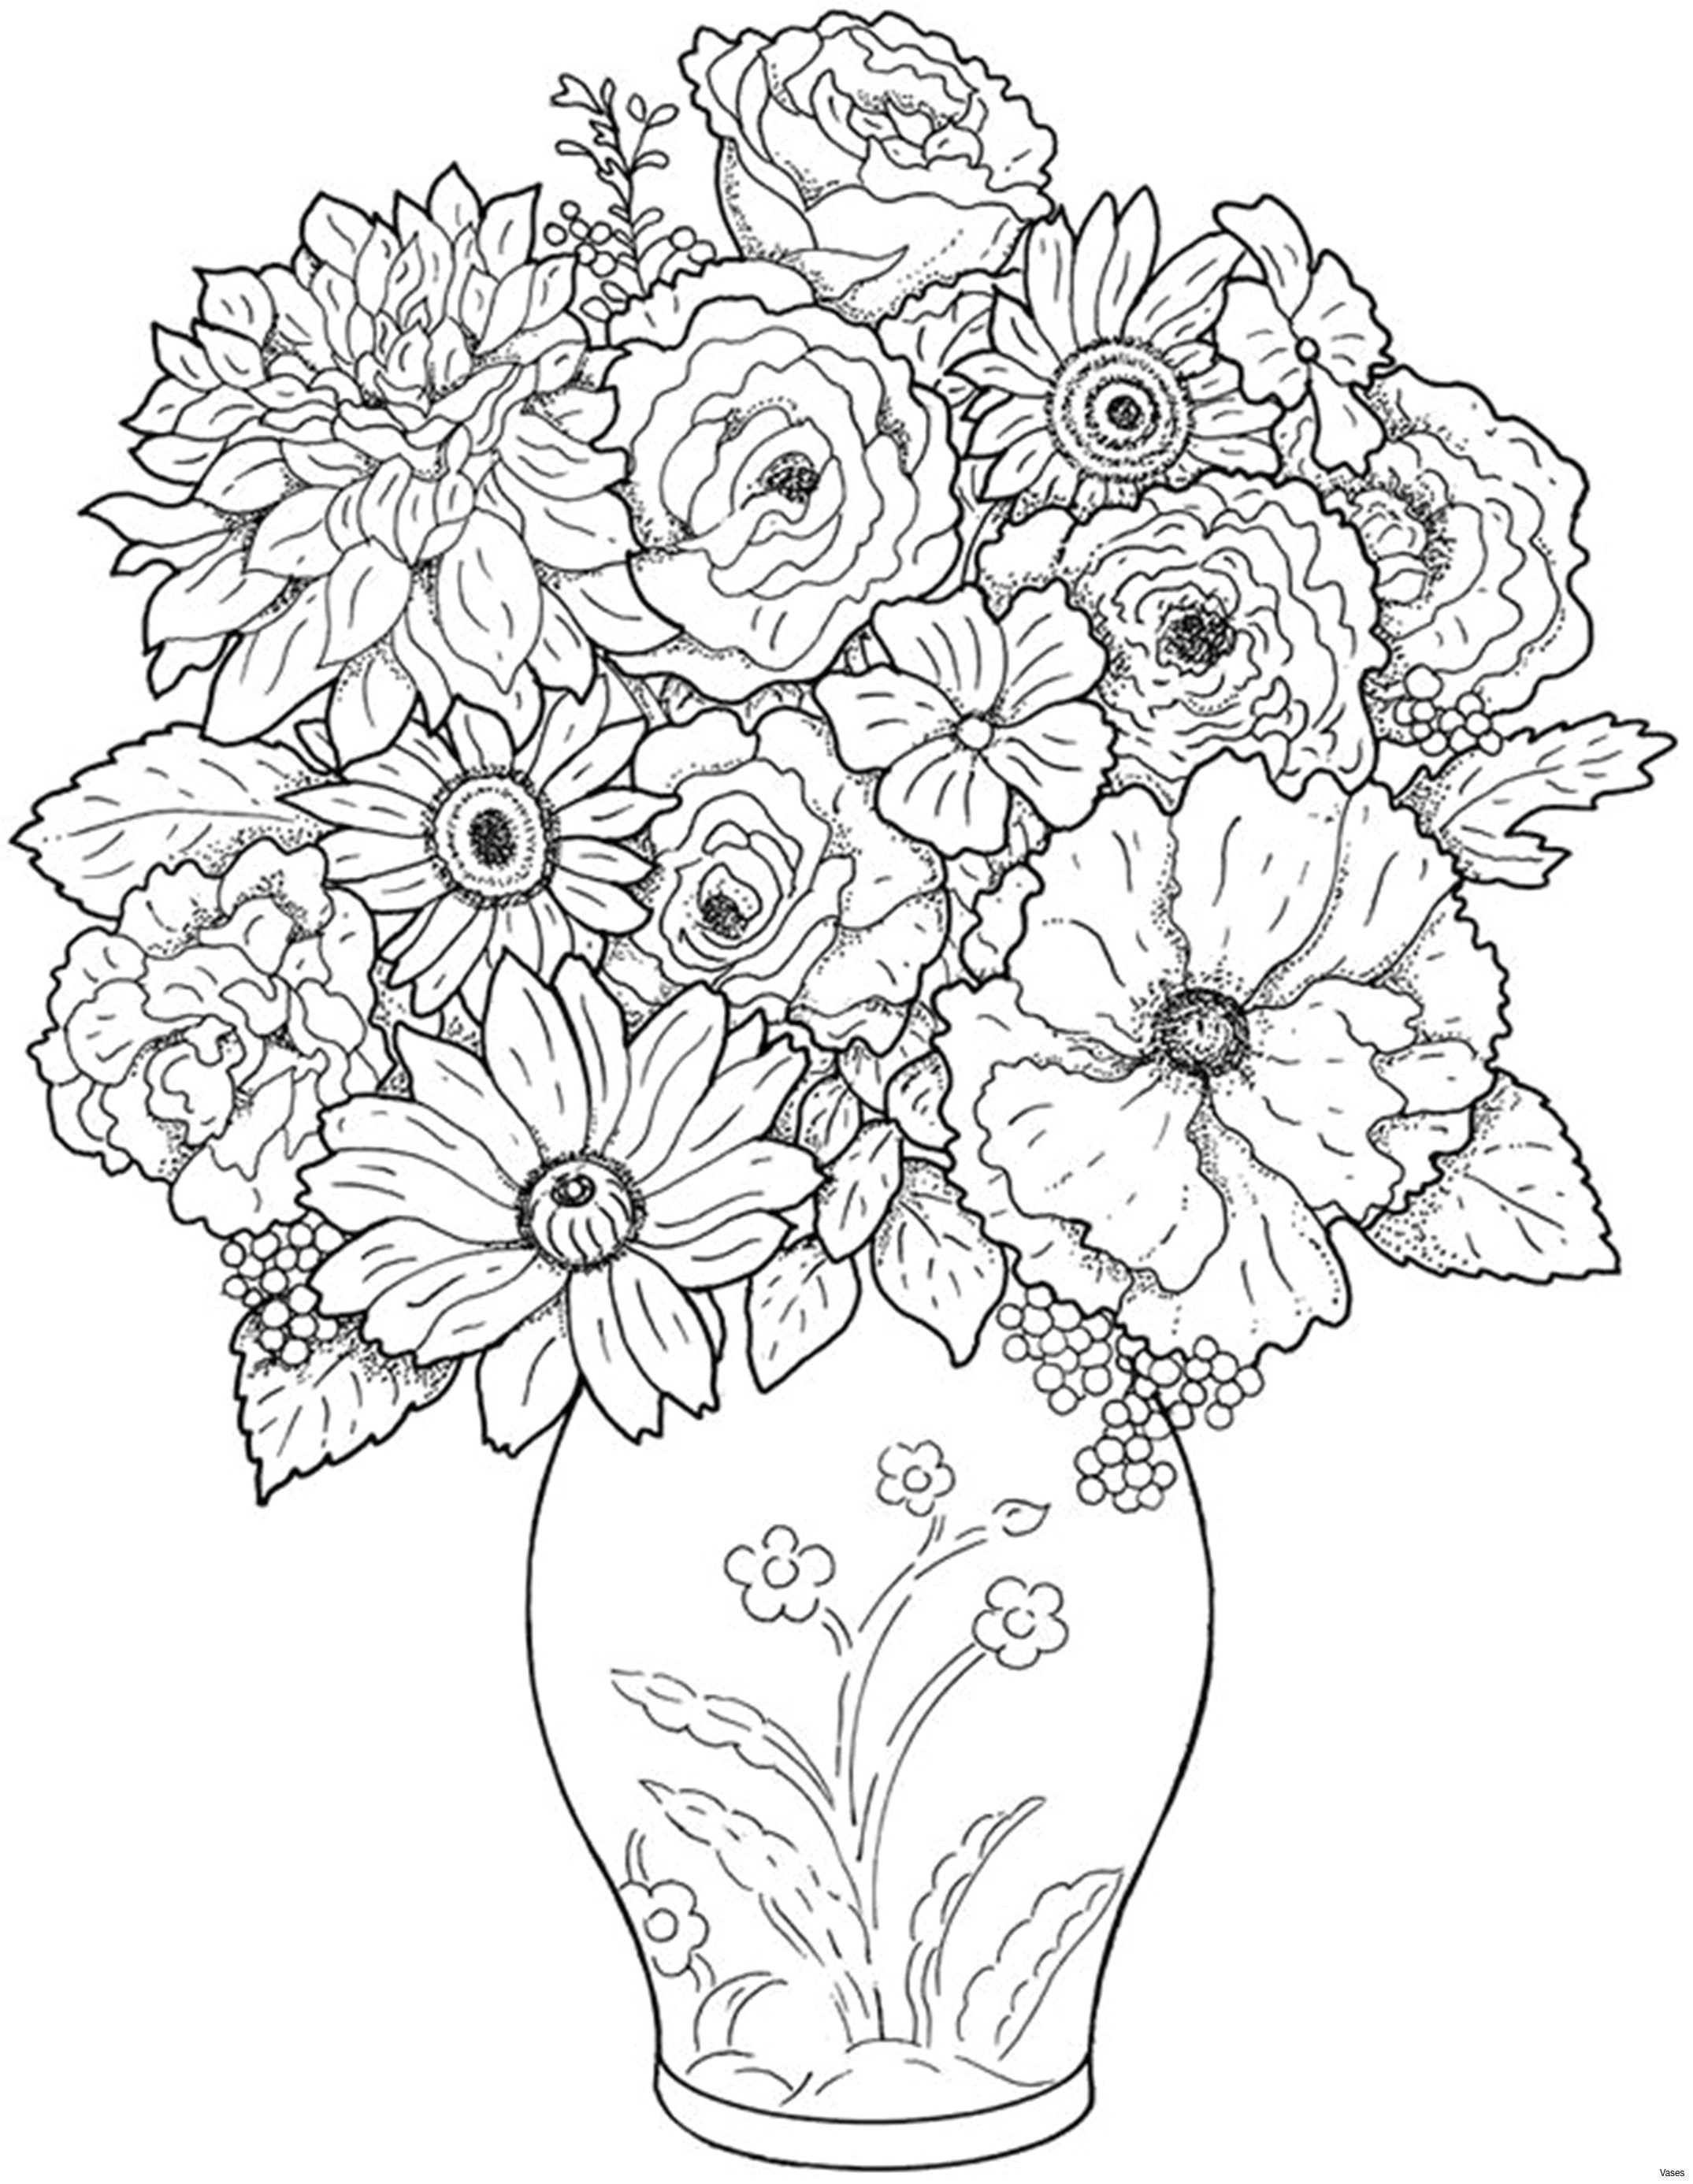 Drawing Images Of Flower Vase Www Colouring Pages Aua Ergewohnliche Cool Vases Flower Vase Coloring